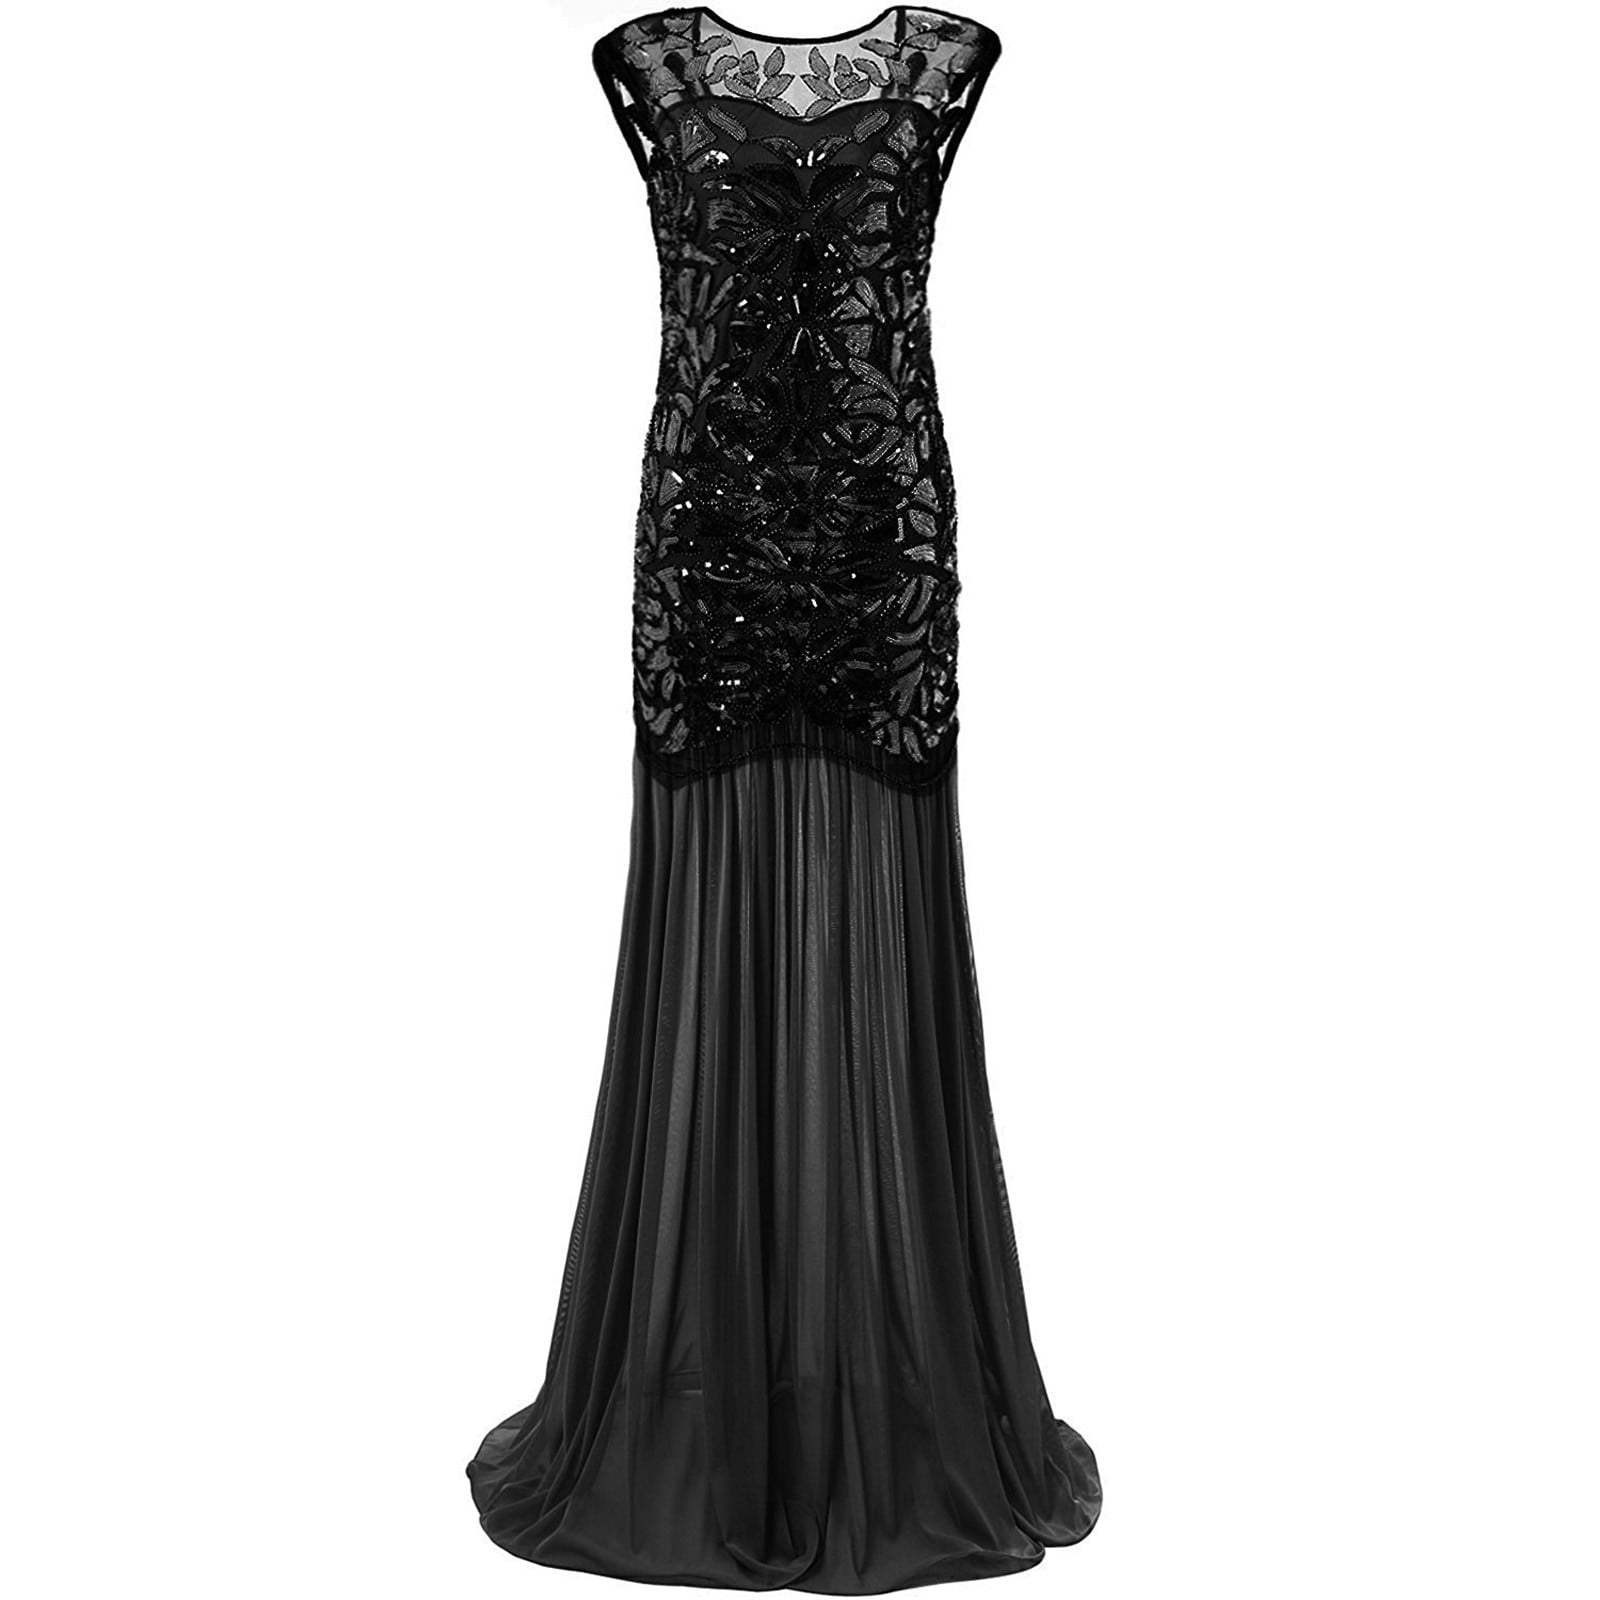 NEW 20s Gatsby Beaded Sequined Floral Maxi Long Flapper Evening Prom Dress Black 